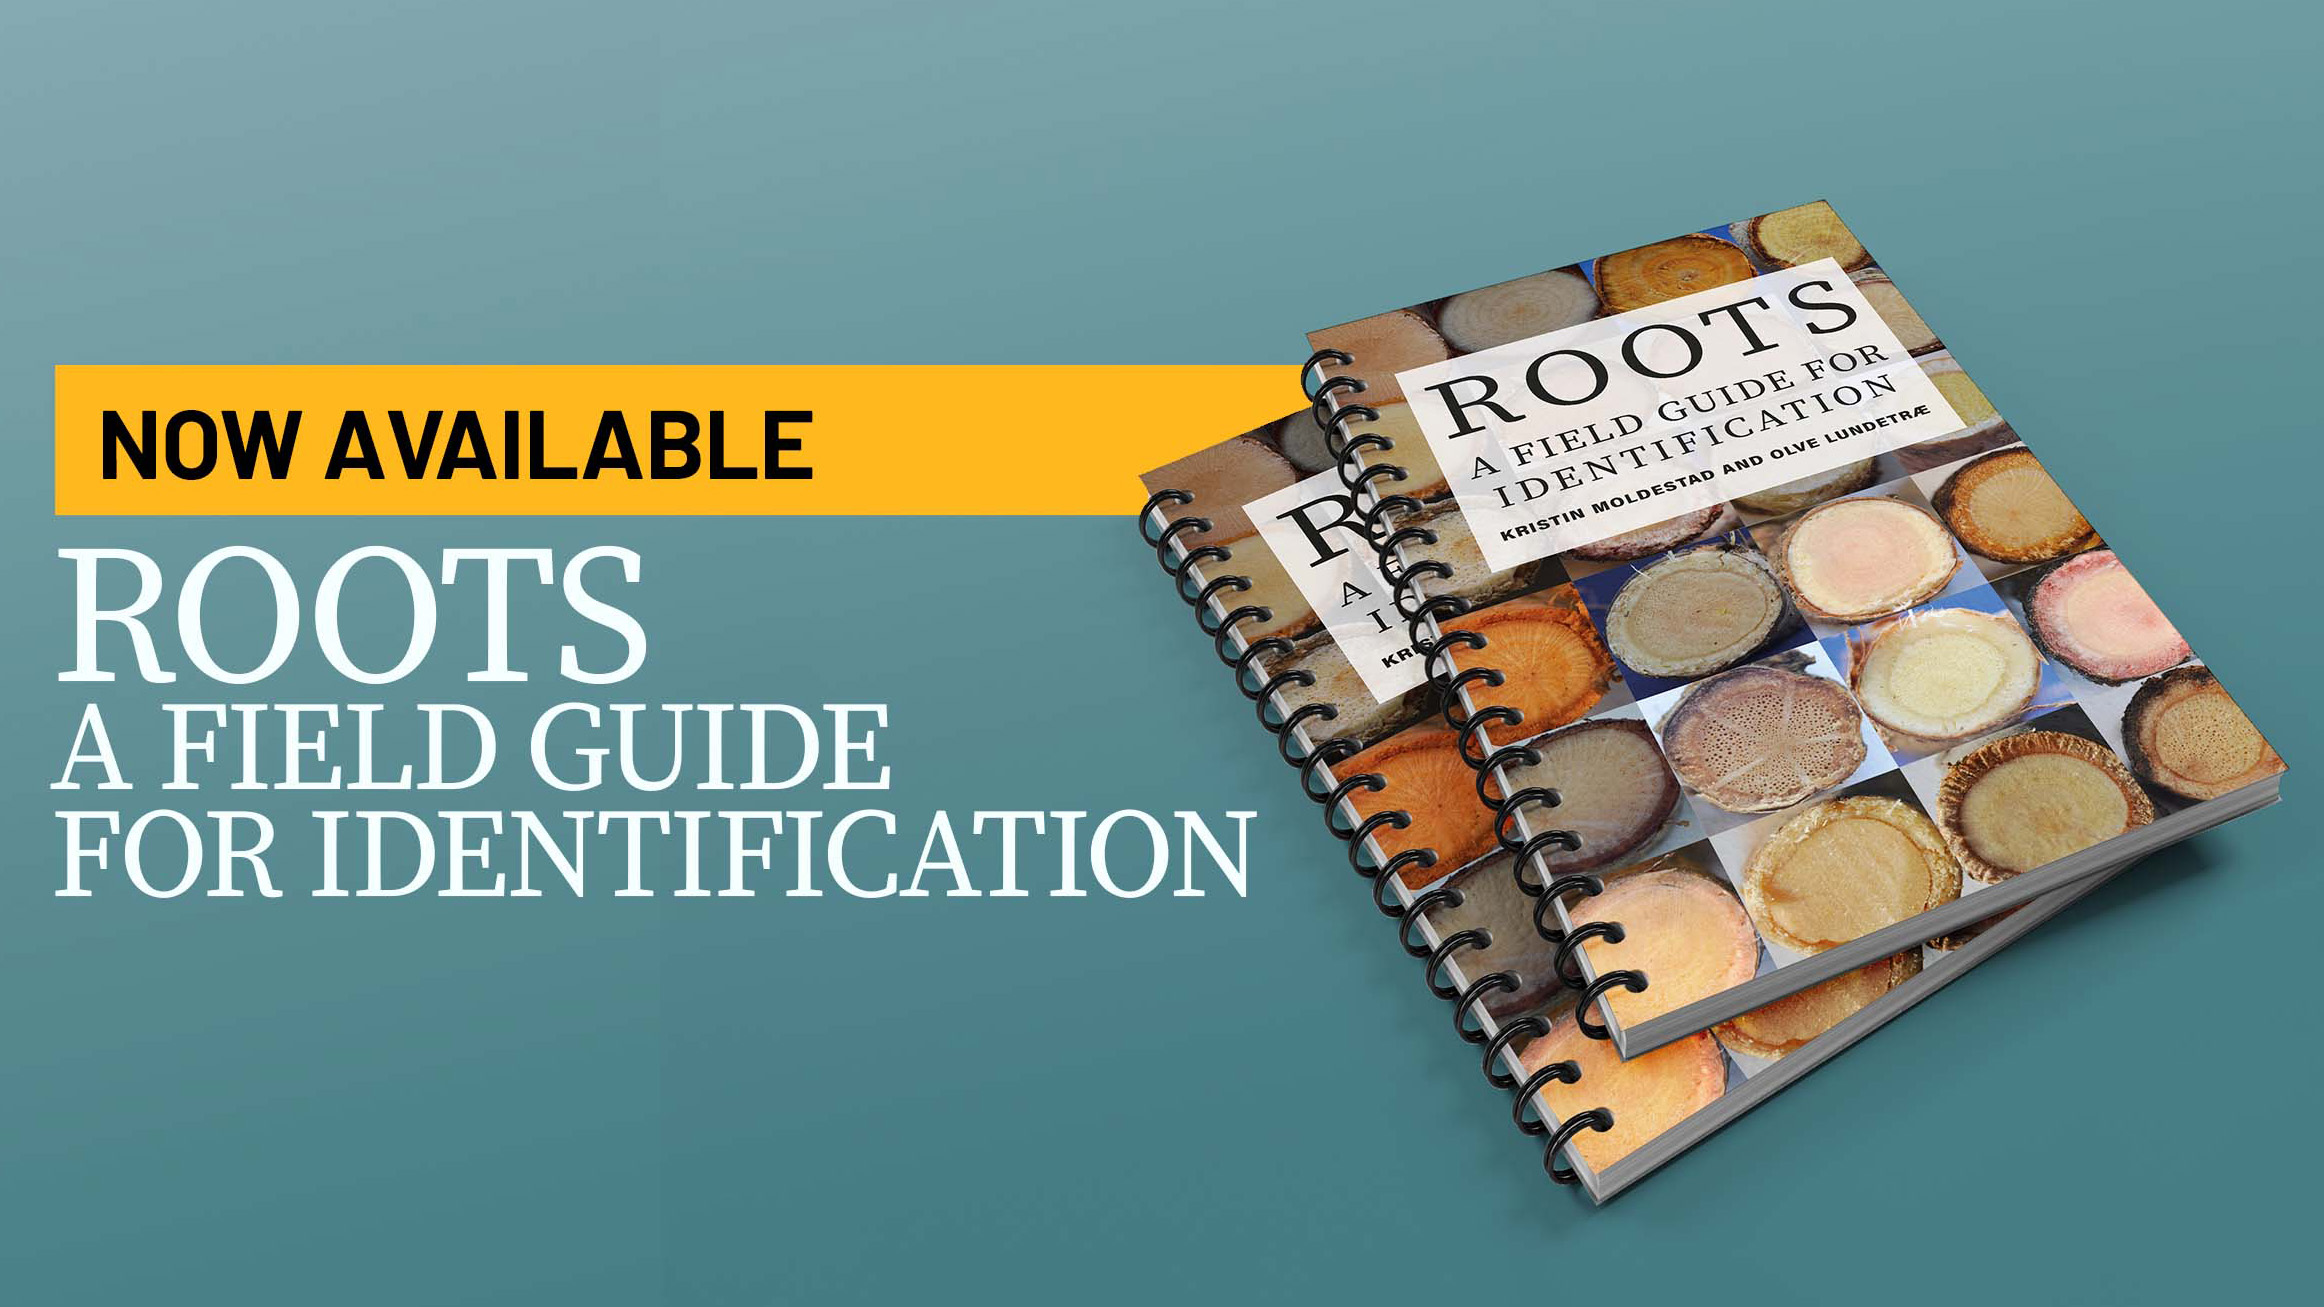 Roots - A Field Guide for Identification